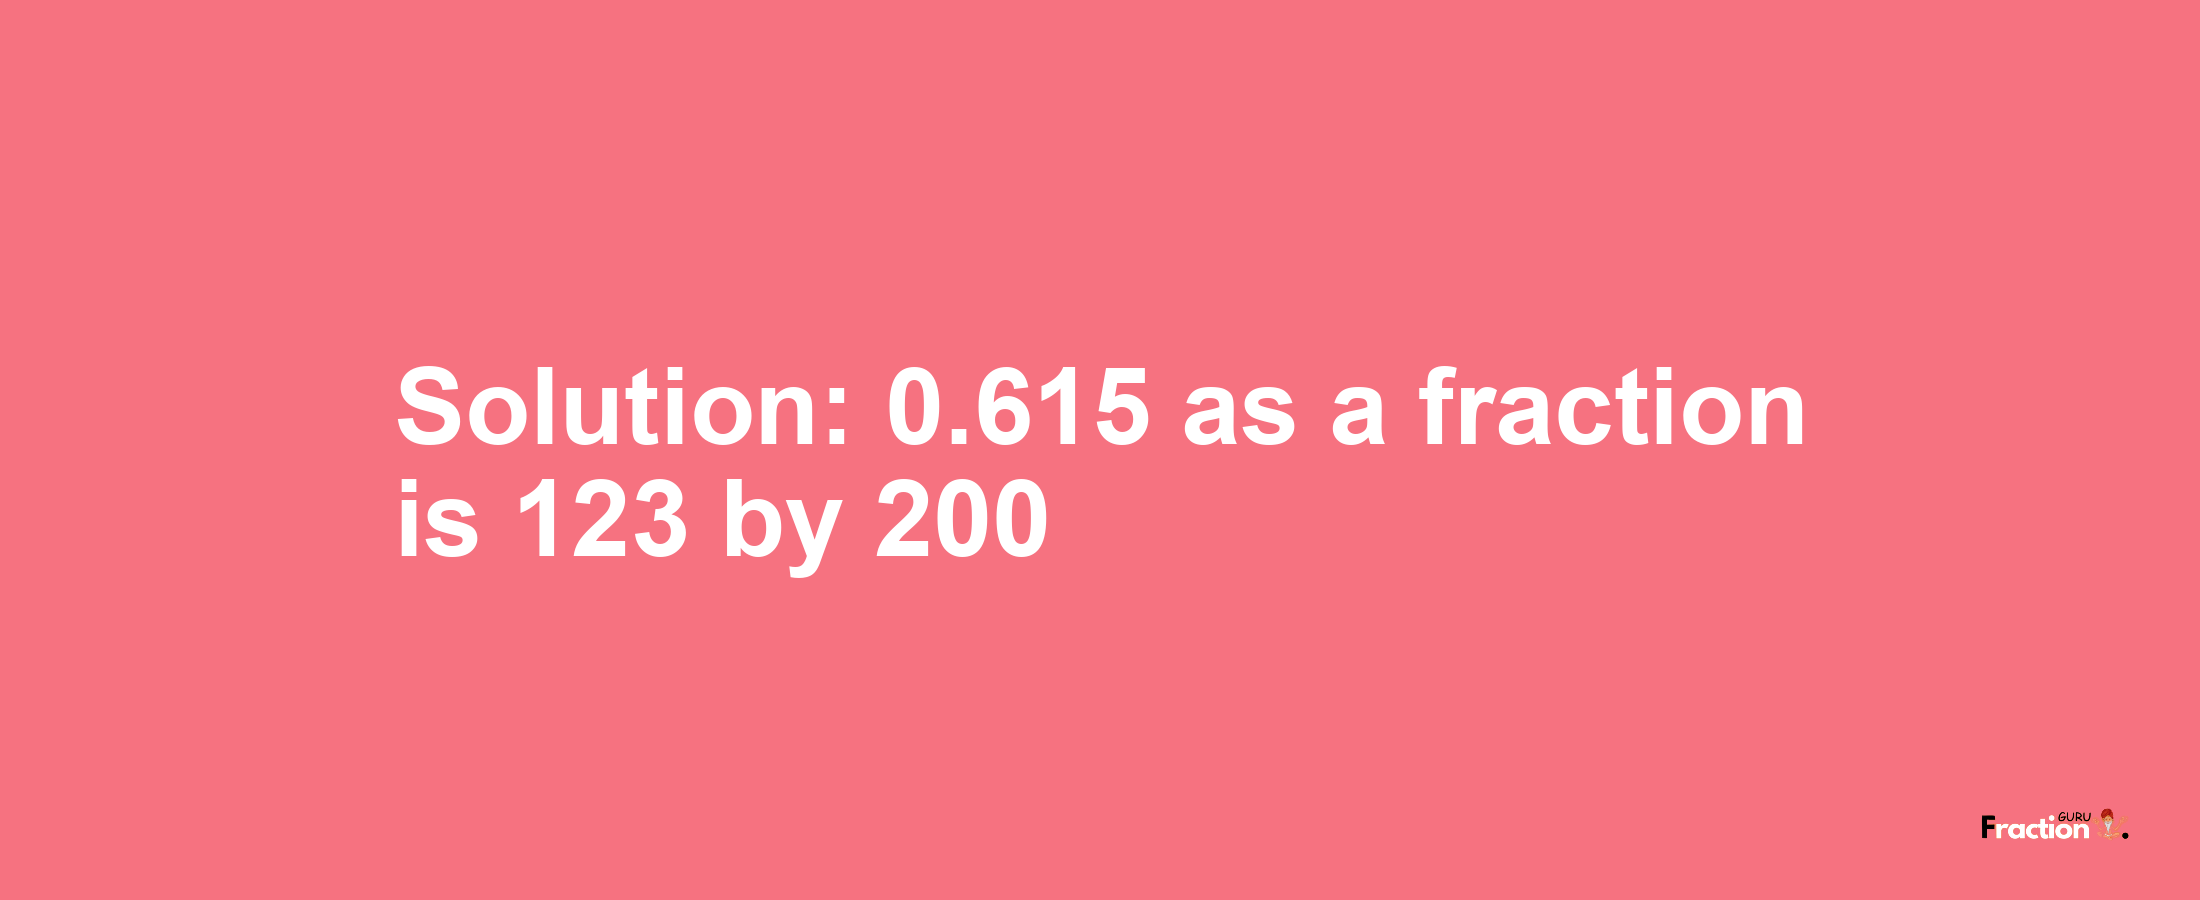 Solution:0.615 as a fraction is 123/200